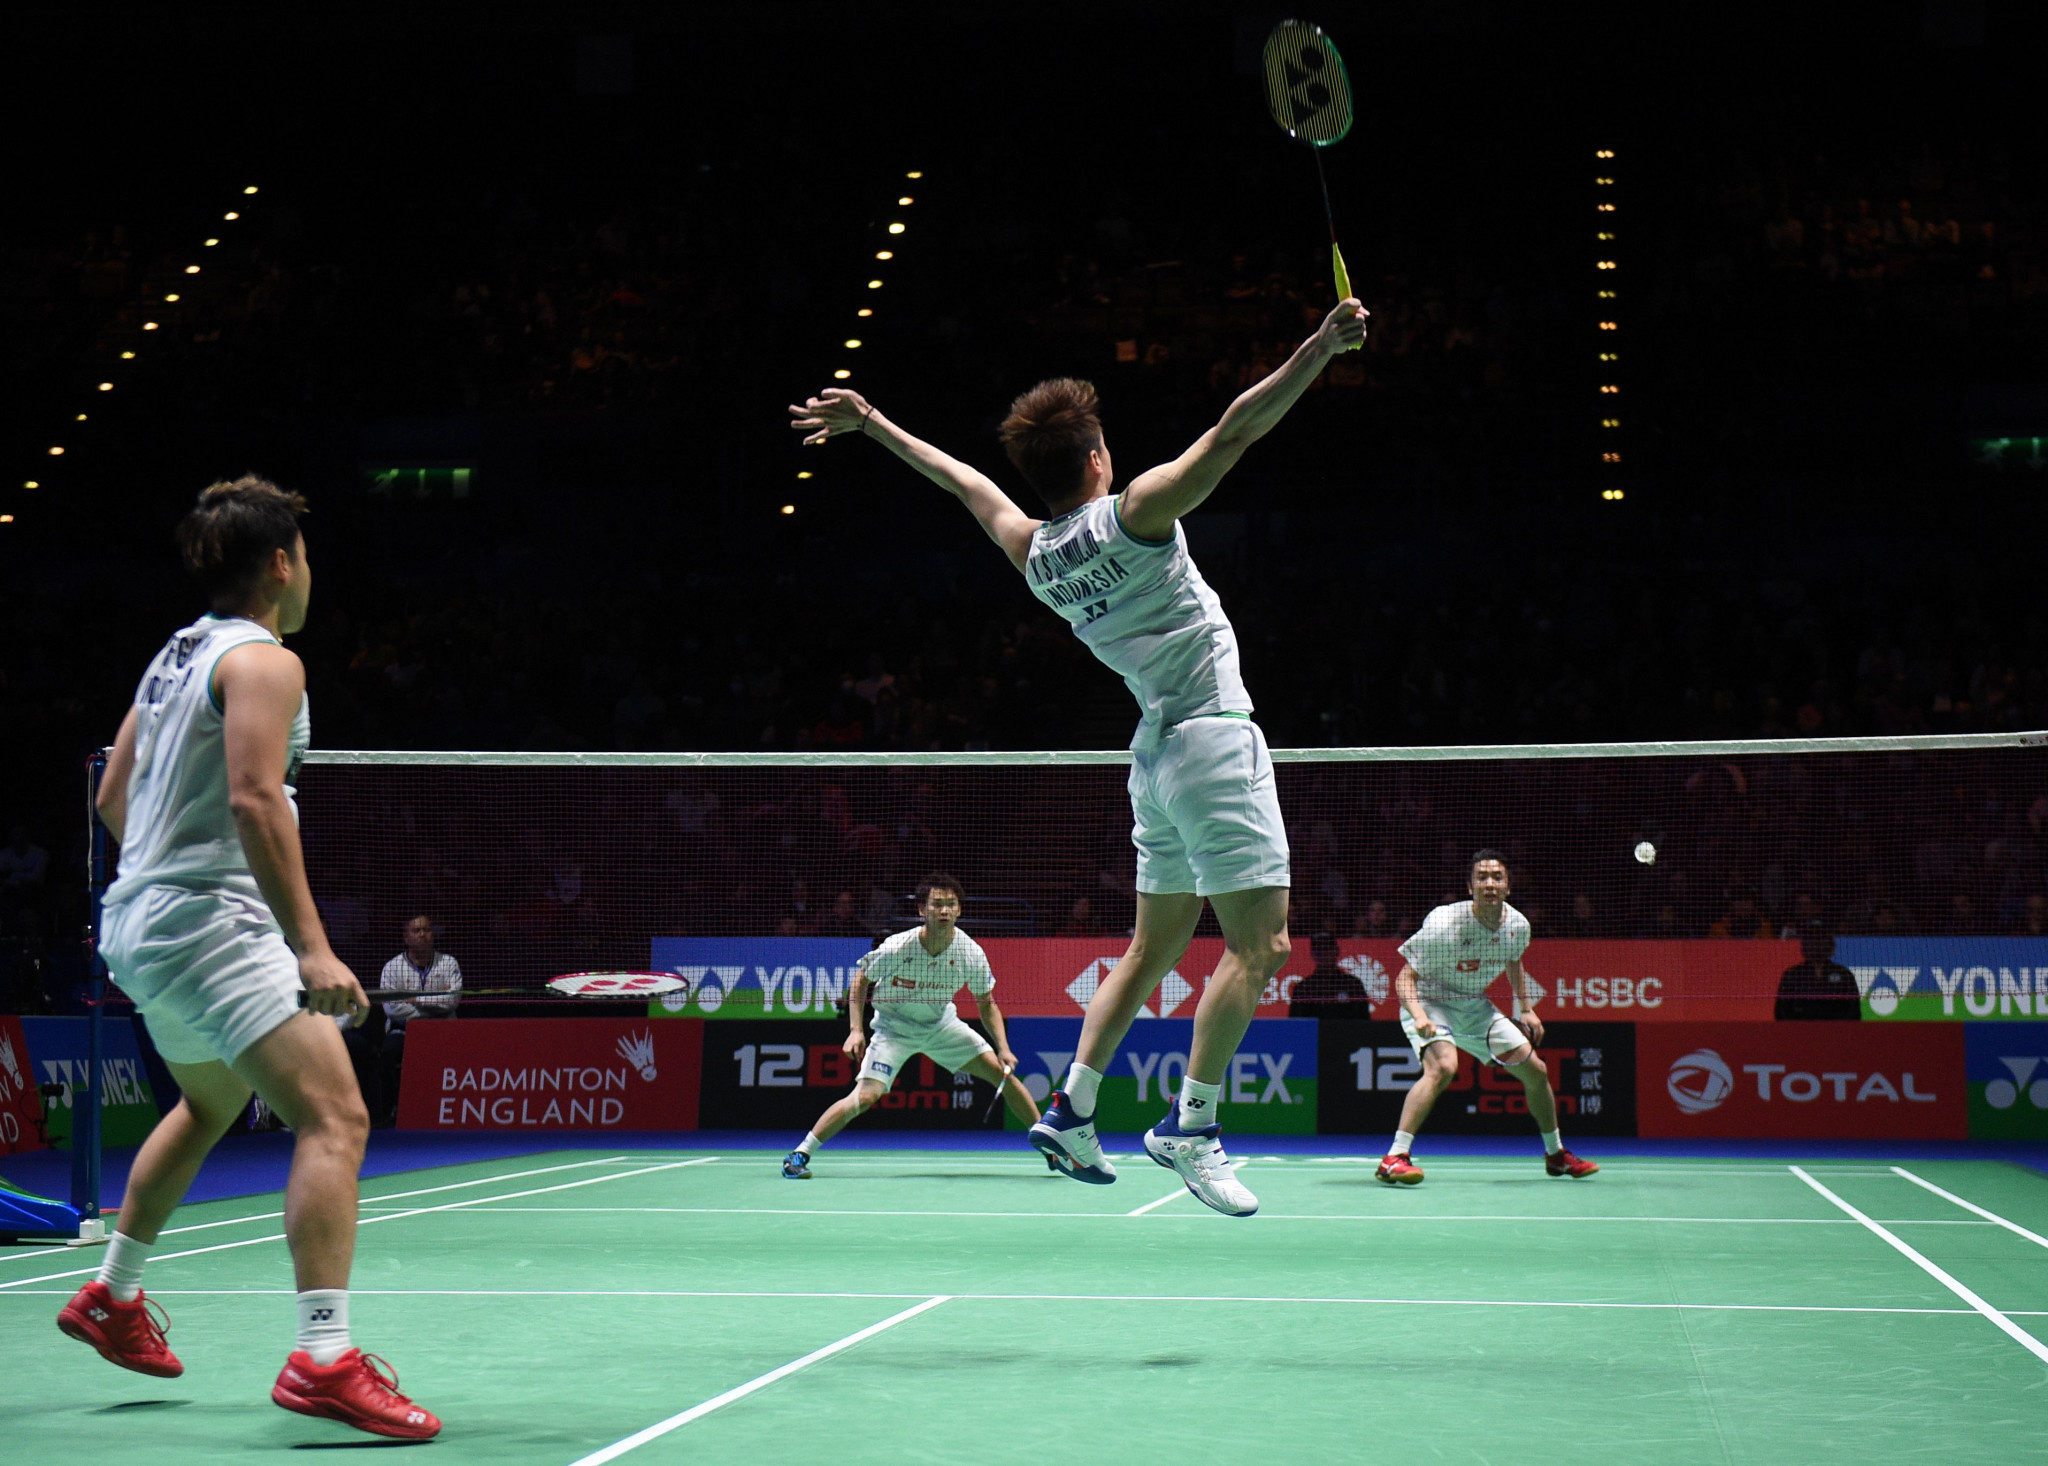 Numerous badminton events have been postponed due to the coronavirus pandemic ©Getty Images